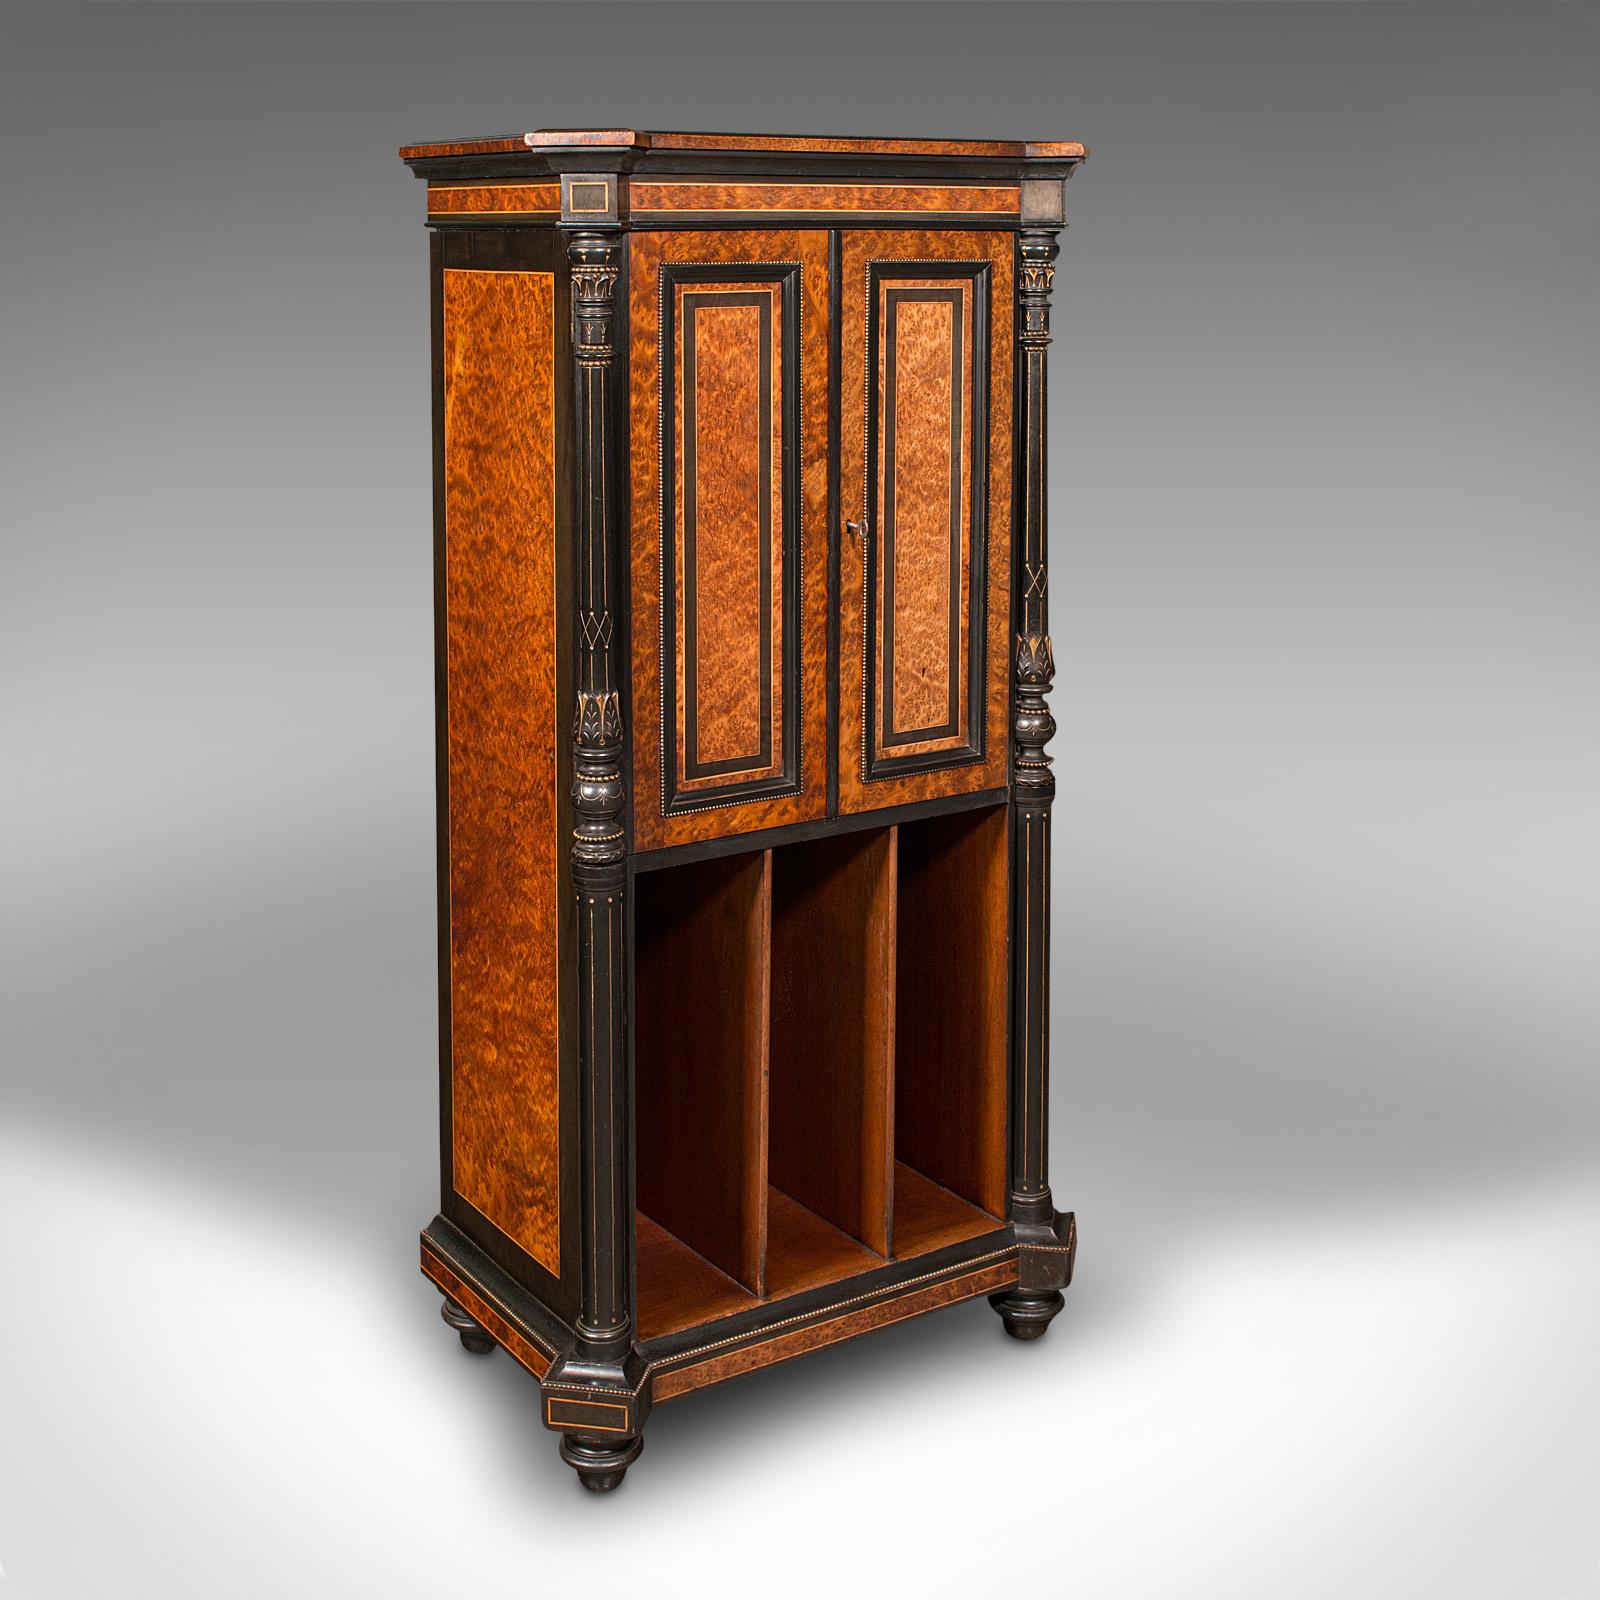 This is an antique gentleman's folio cabinet. An English, bird's-eye maple and burr walnut decorative cupboard, dating to the Regency period, circa 1820.

Exceptional craftsmanship and of superior material quality
Displays a desirable aged patina